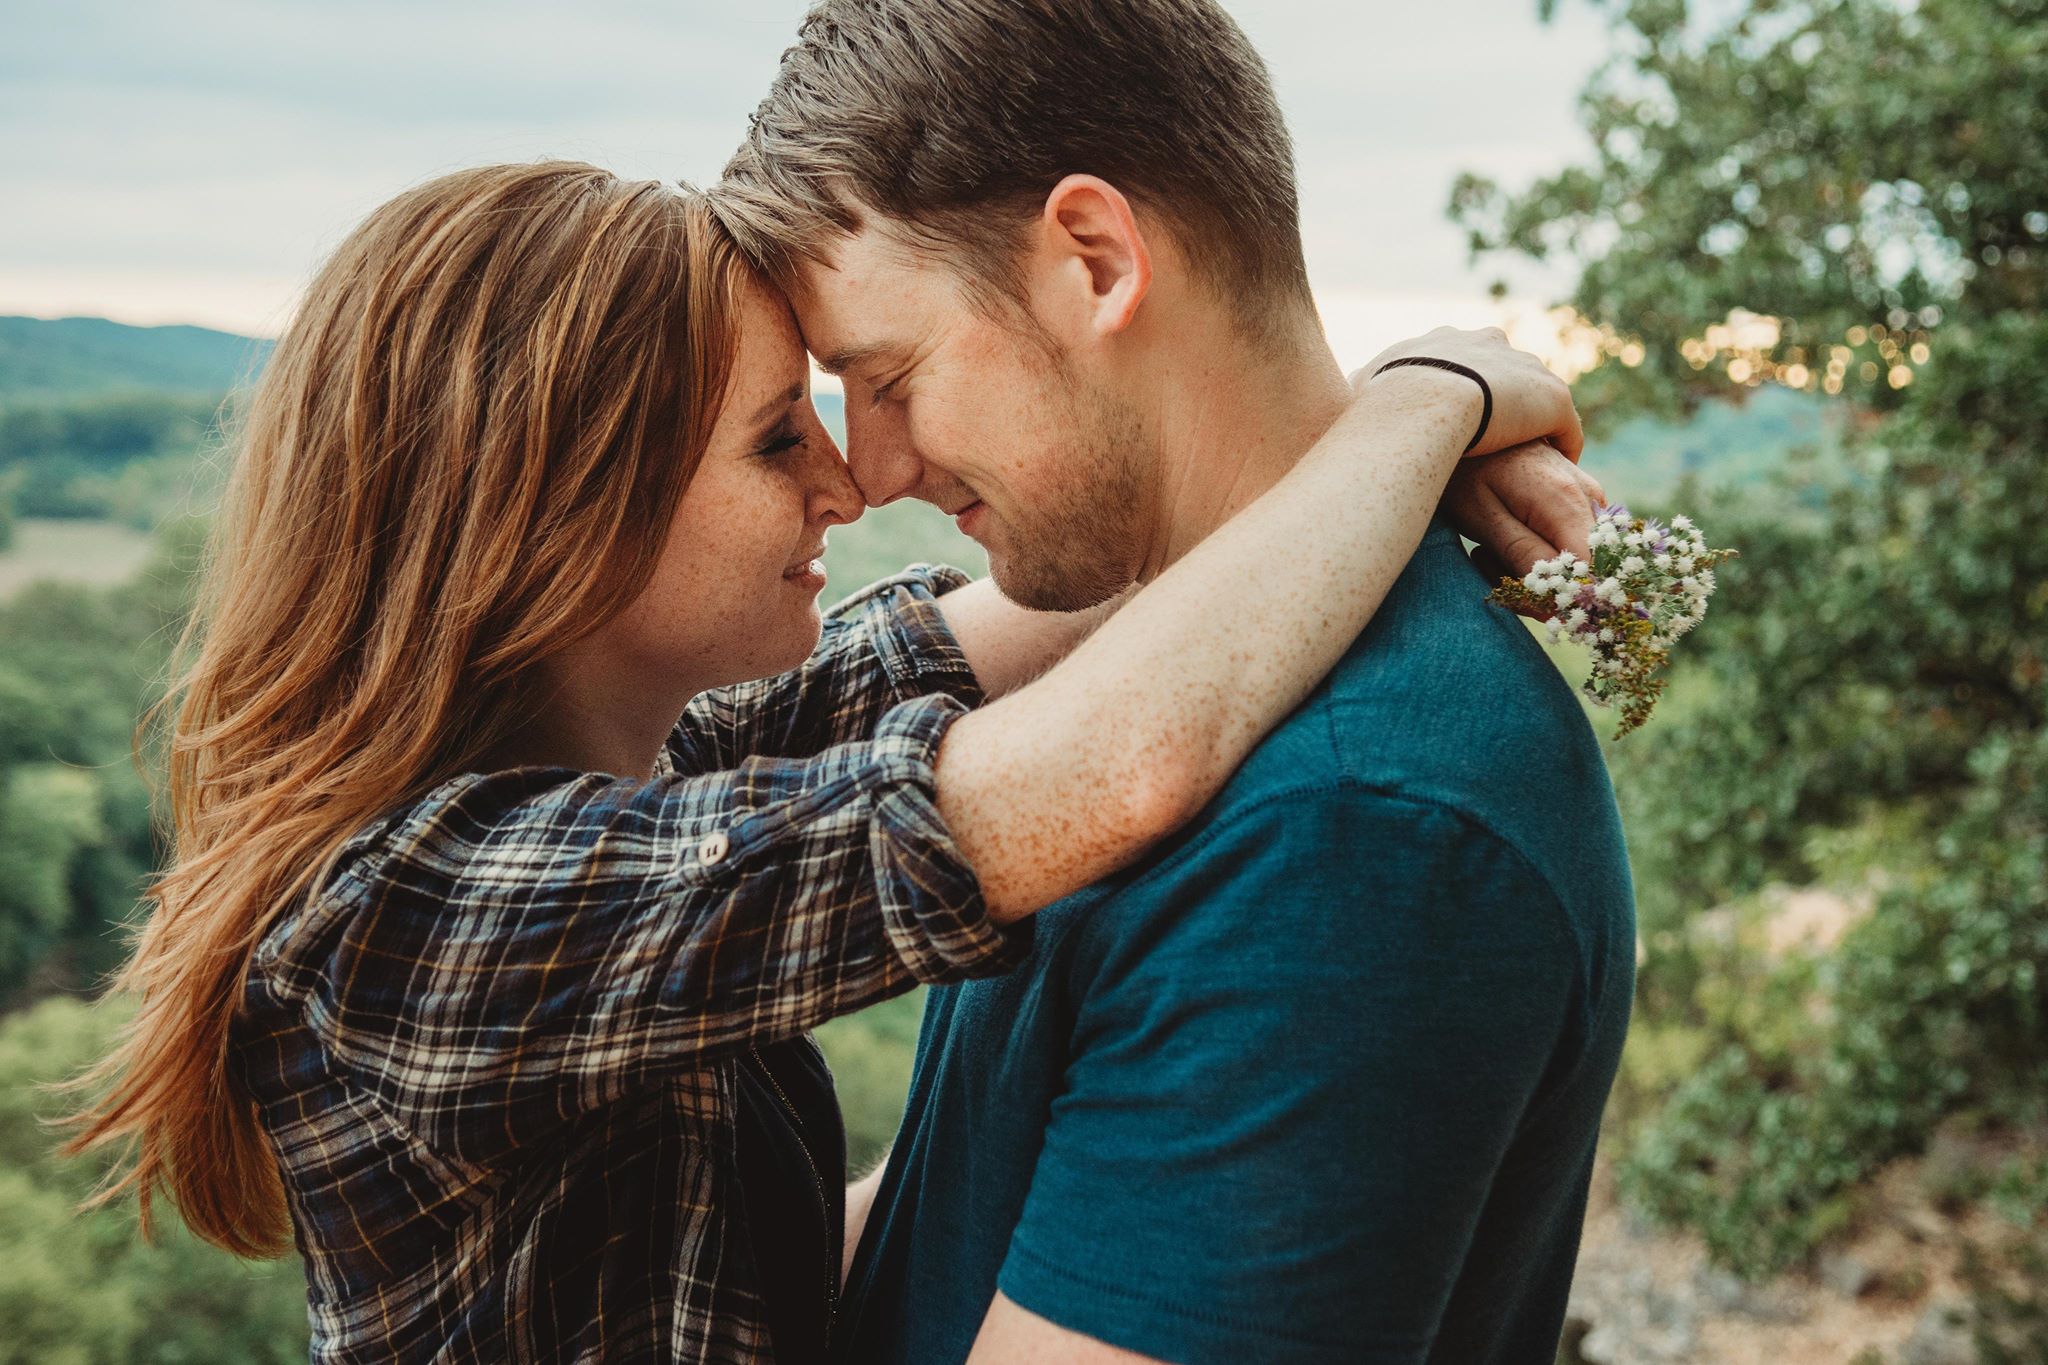 Signs it's the right time to say "I love you":